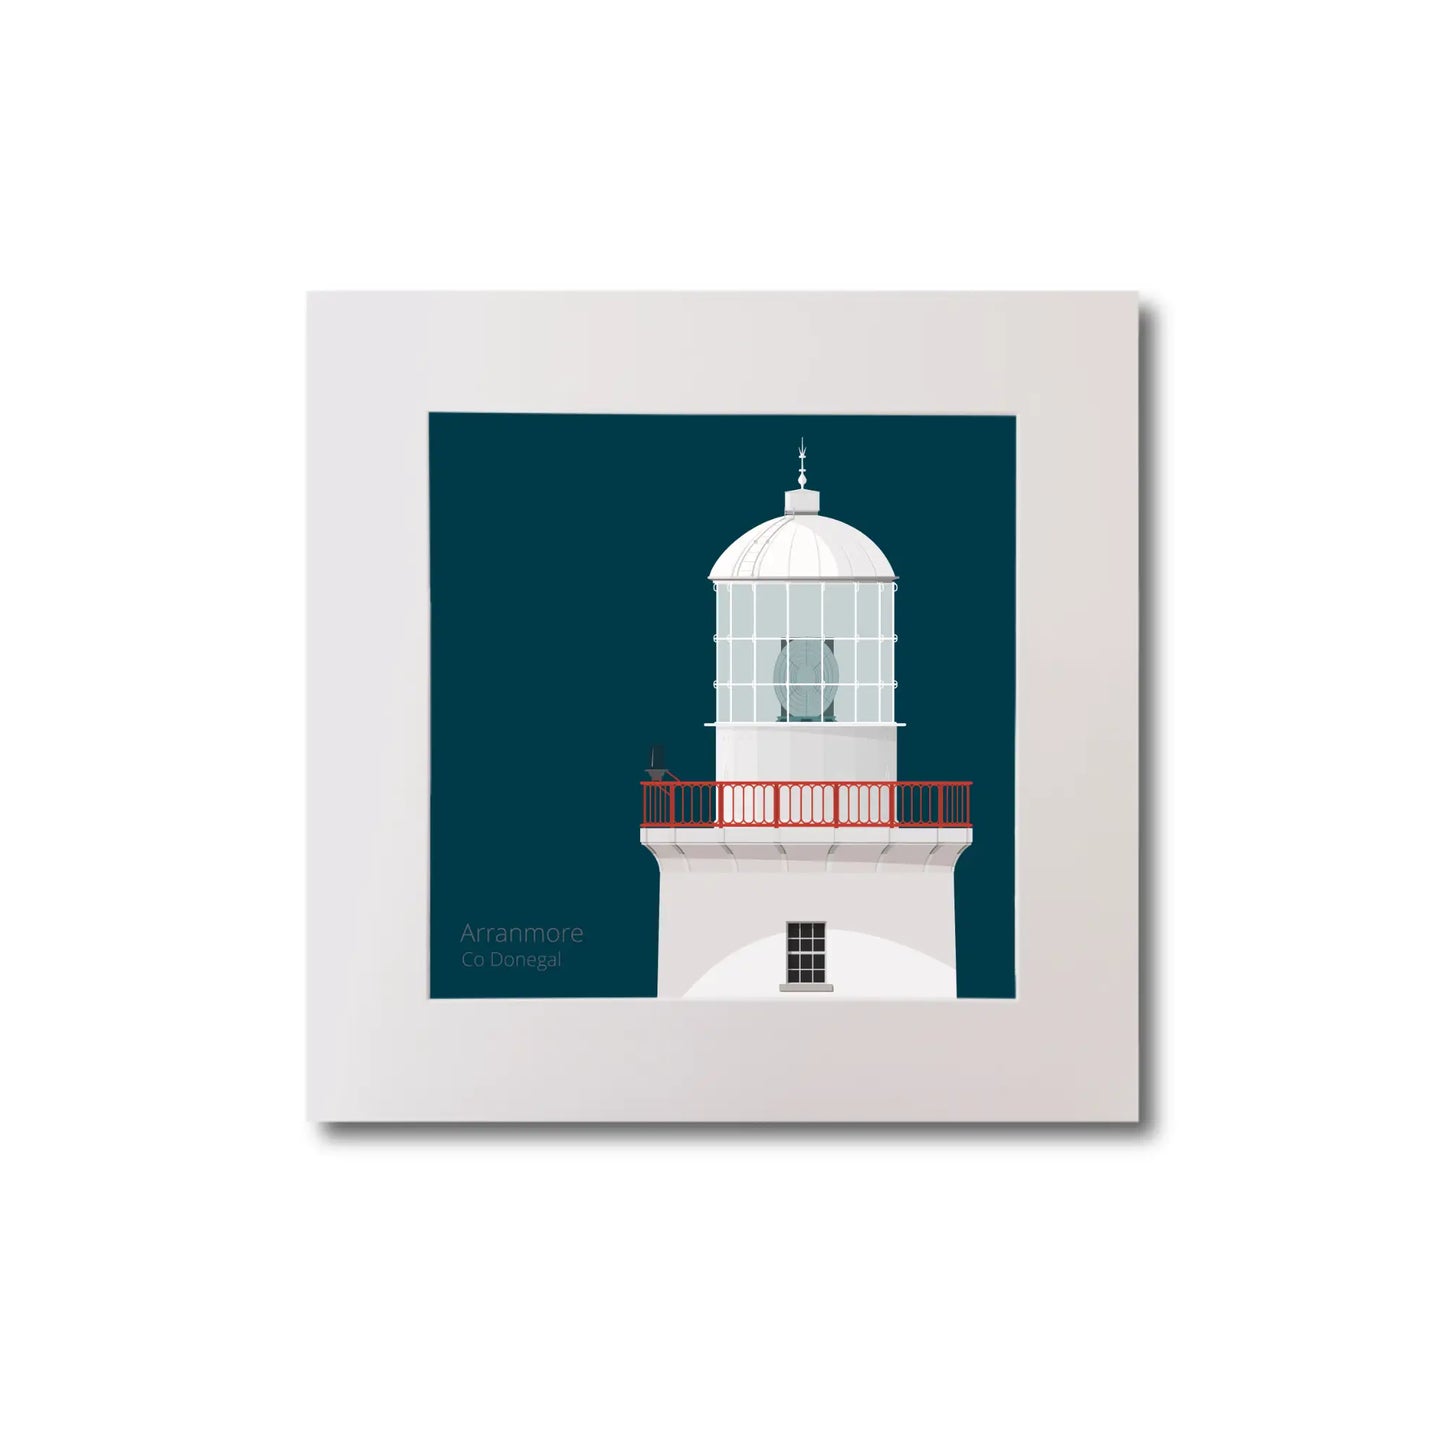 Illustration of Arranmore lighthouse on a midnight blue background, mounted and measuring 20x20cm.